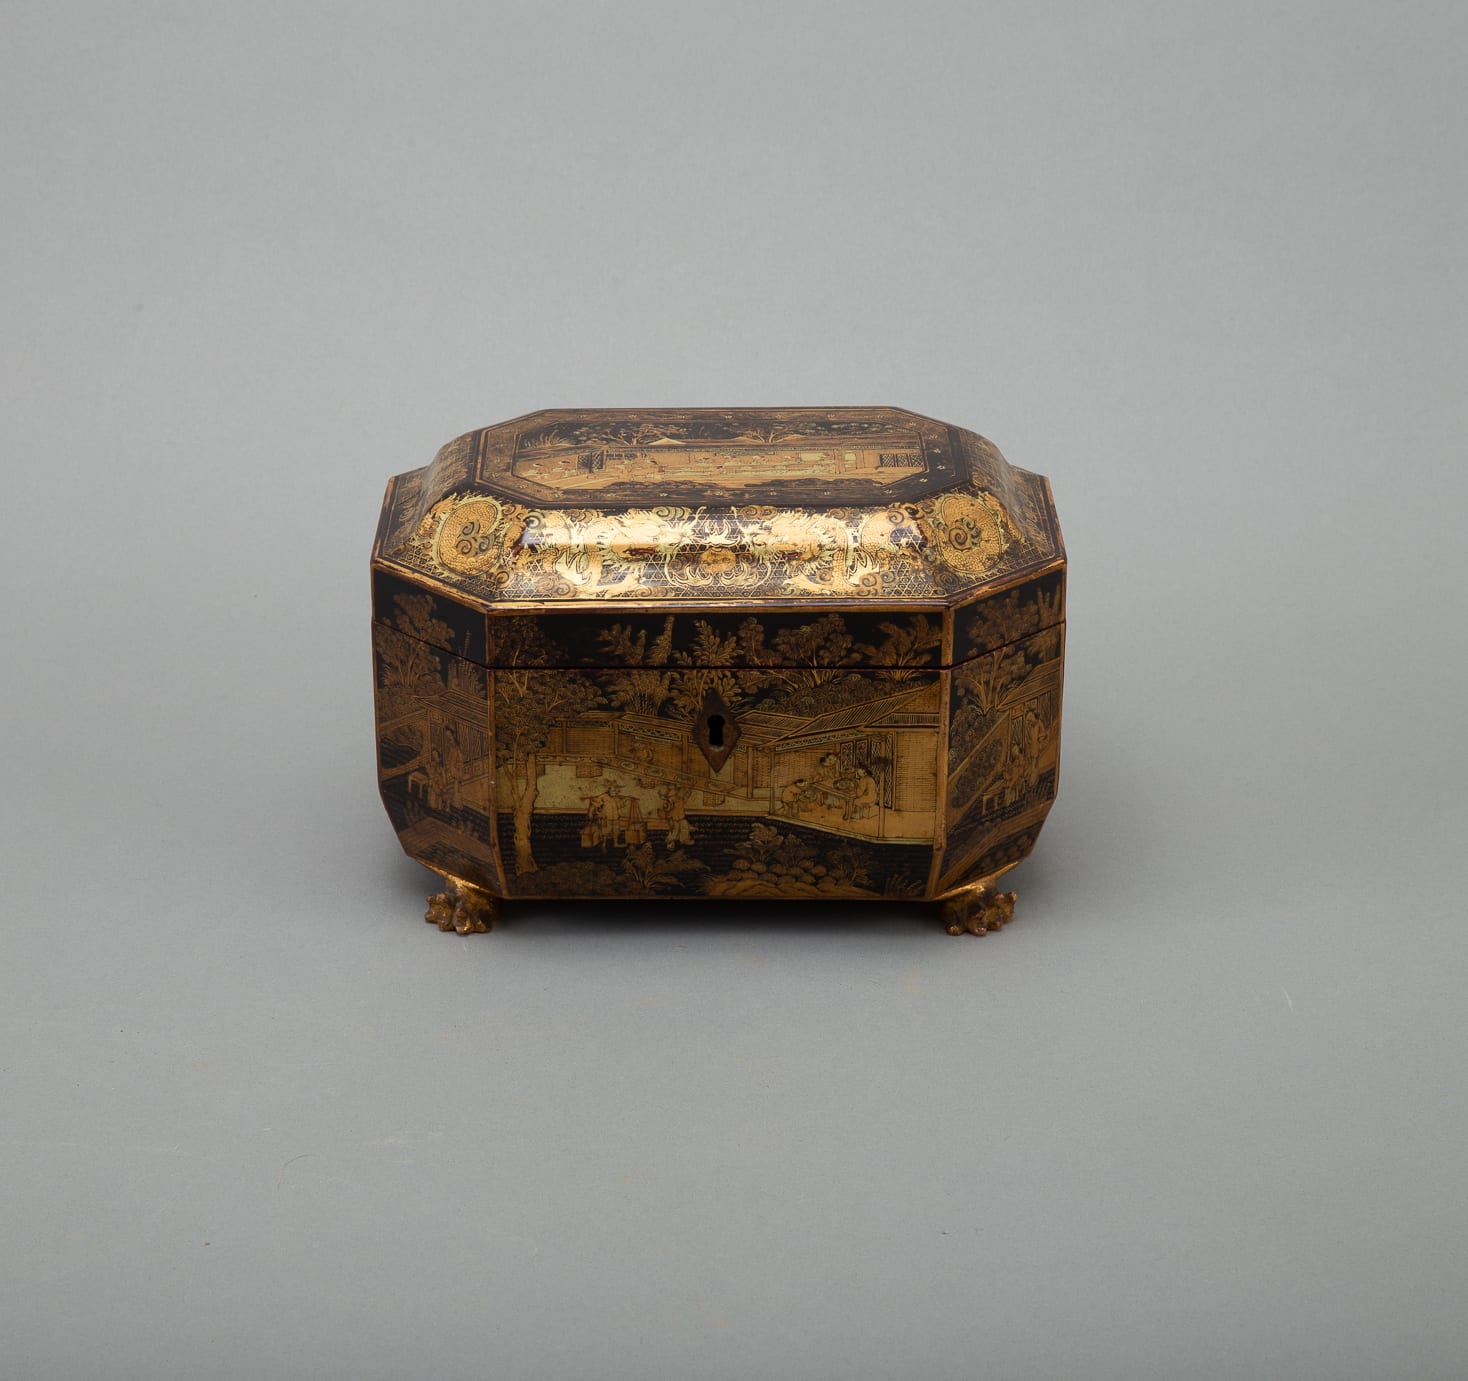 Lot 276: 19th c. Chinese Export Lacquer Tea Caddy